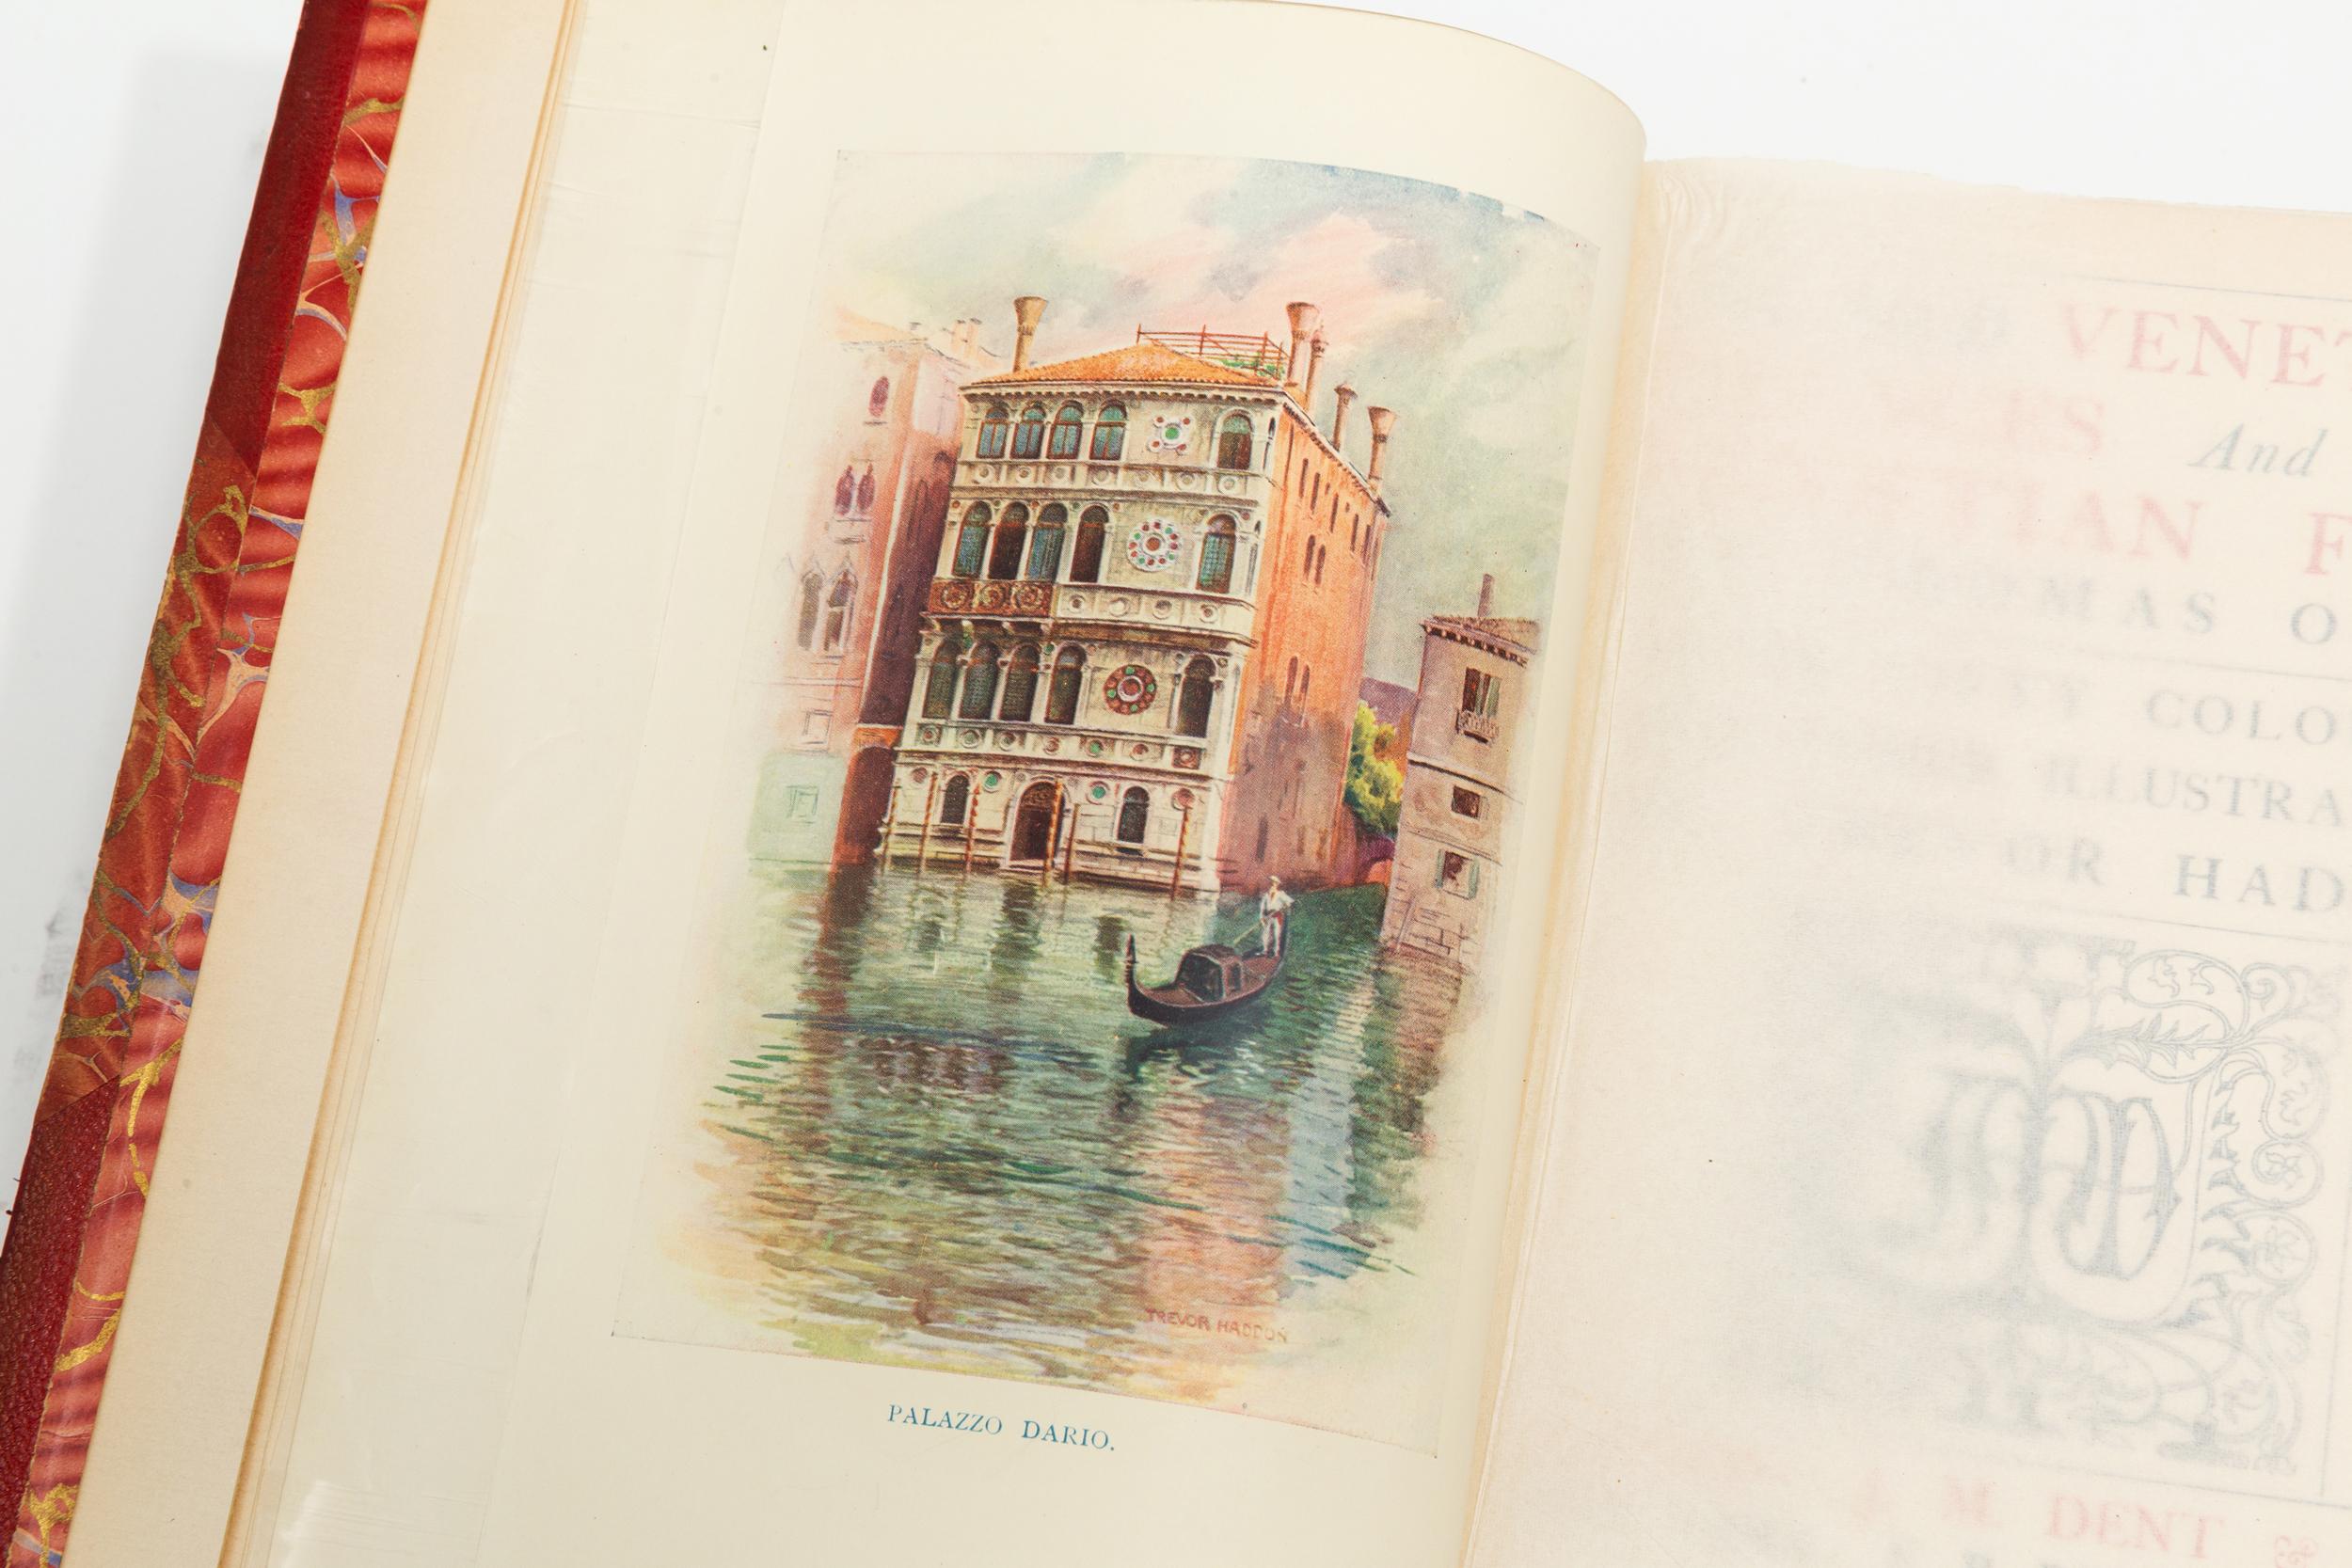 1 Volume. Thomas Okey. The old venetian palaces & old venetian folk.
With 50 Colored plates and other illustrations by Trevor Haddon. Bound in 3/4 red morocco, marbled boards and endpapers, top edges gilt, raised bands, gilt panels. Published: New